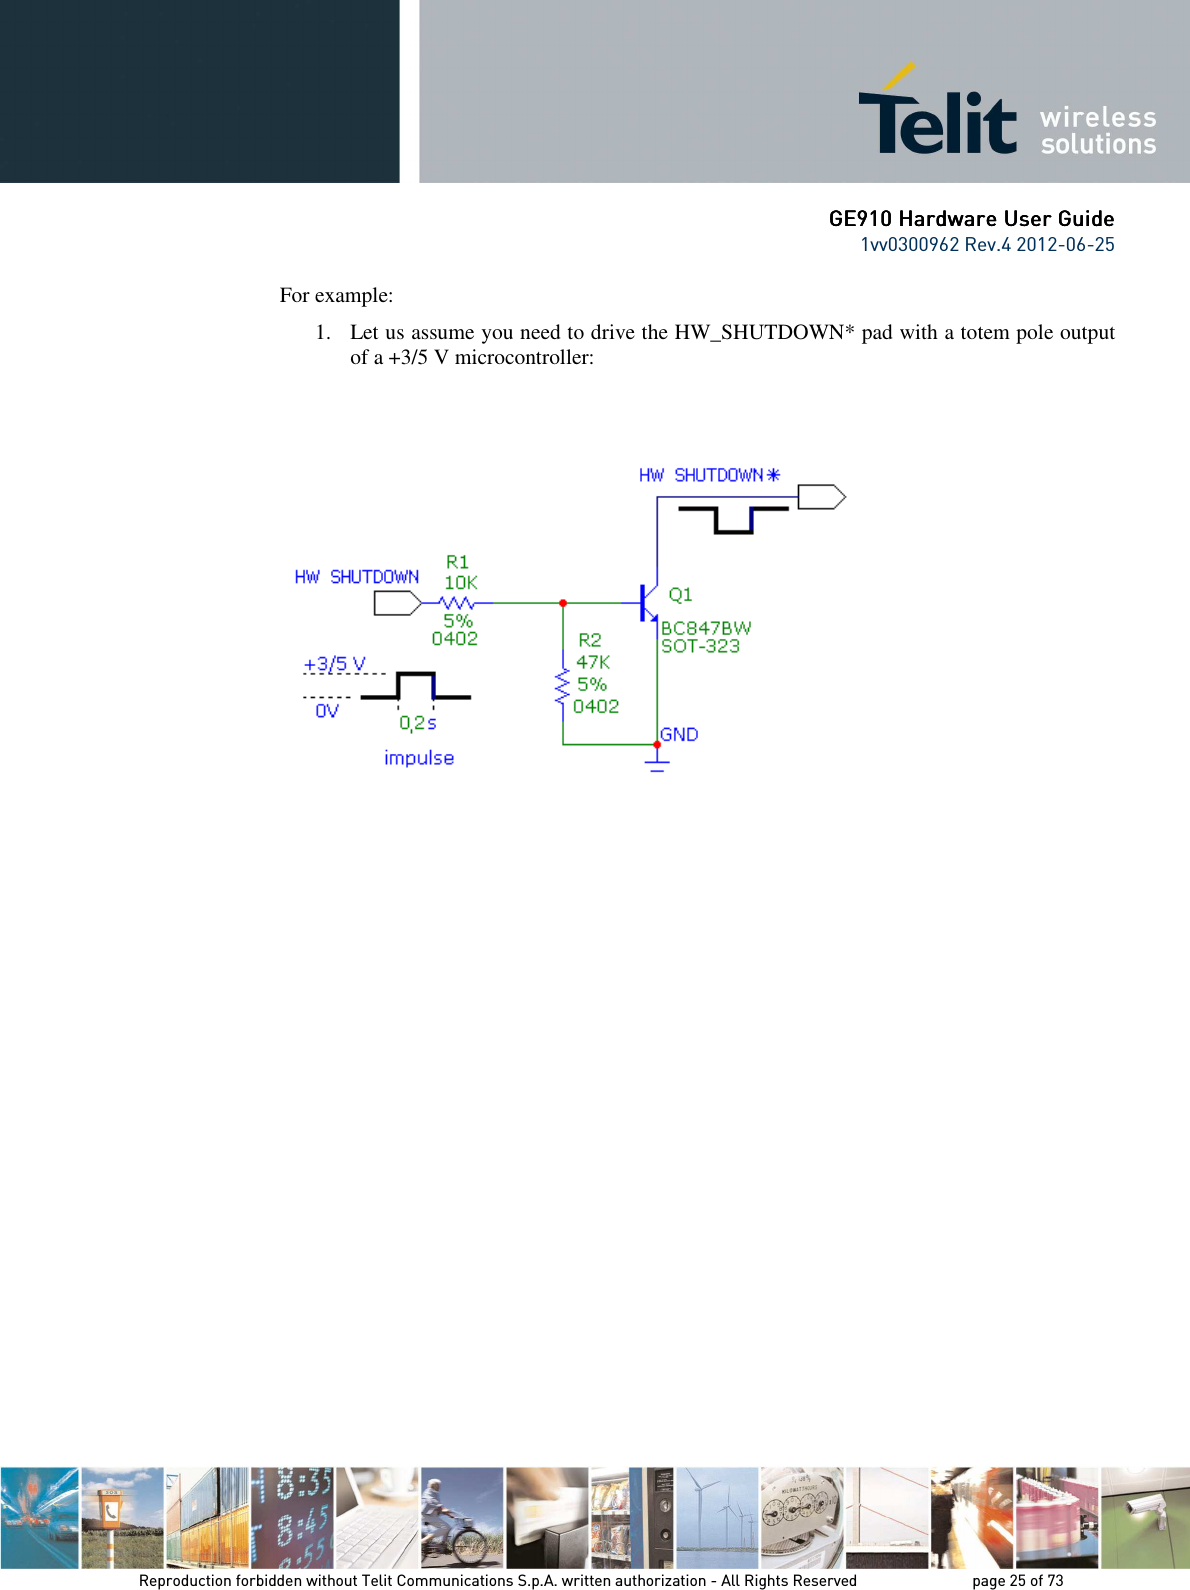      GE9GE9GE9GE910 Hardware User Guide10 Hardware User Guide10 Hardware User Guide10 Hardware User Guide    1vv0300962 Rev.4 2012-06-25    Reproduction forbidden without Telit Communications S.p.A. written authorization - All Rights Reserved    page 25 of 73 Mod. 0805 2011-07 Rev.2 For example: 1. Let us assume you need to drive the HW_SHUTDOWN* pad with a totem pole output of a +3/5 V microcontroller:     